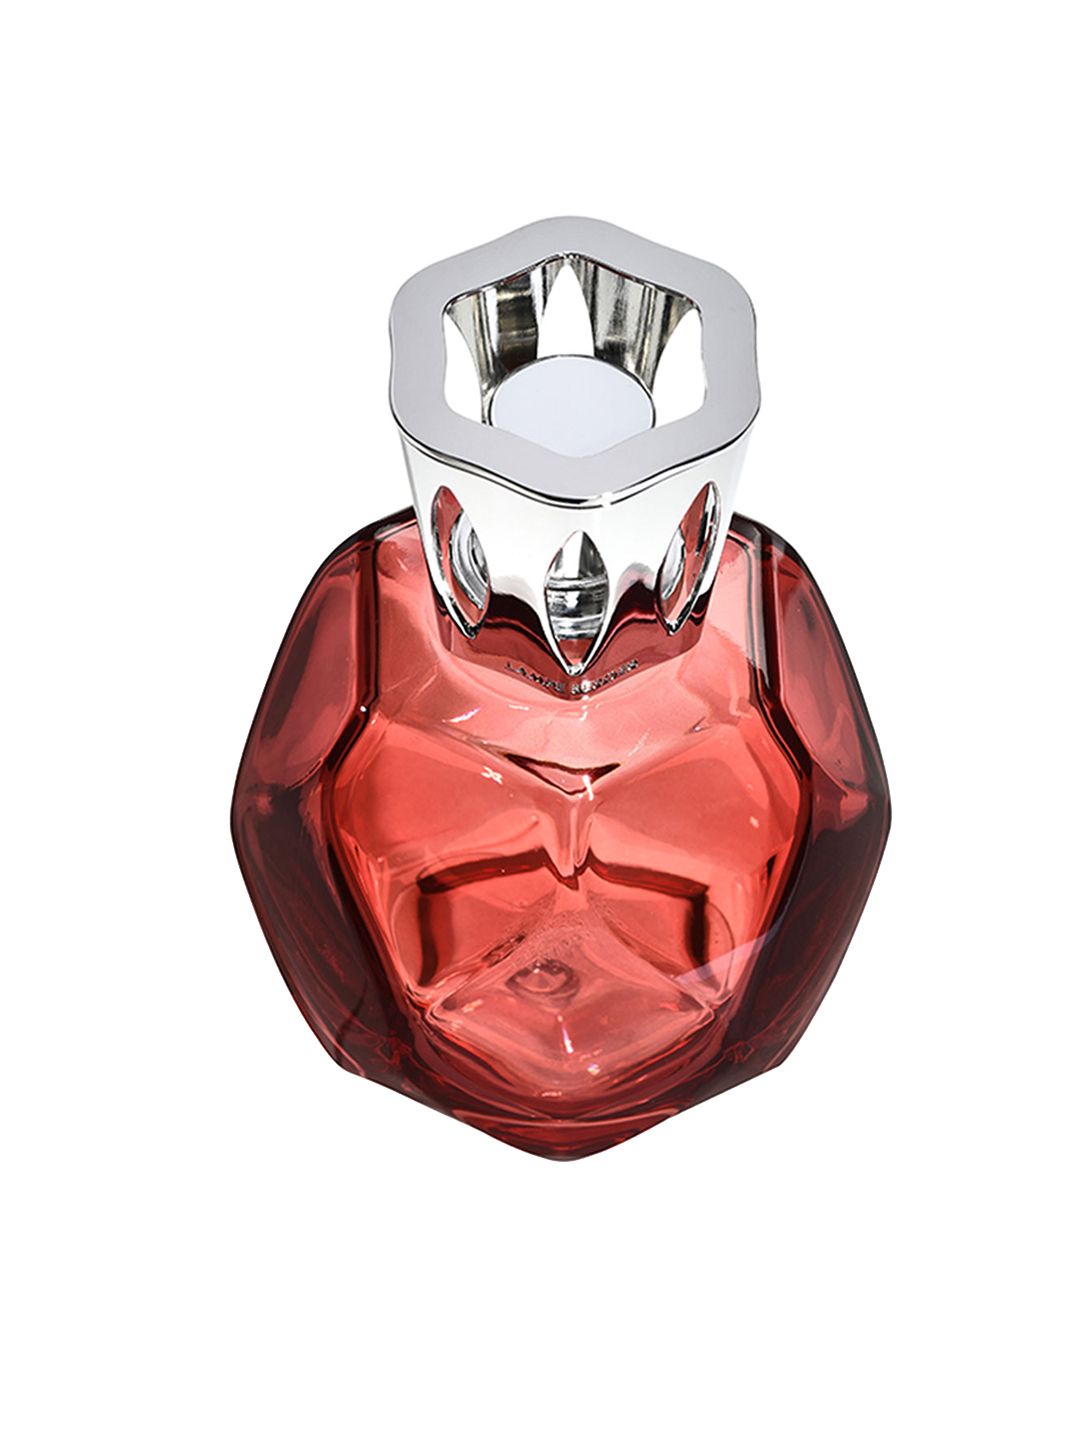 MAISON BERGER Resonance Paprika Aroma Oil Diffuser Price in India